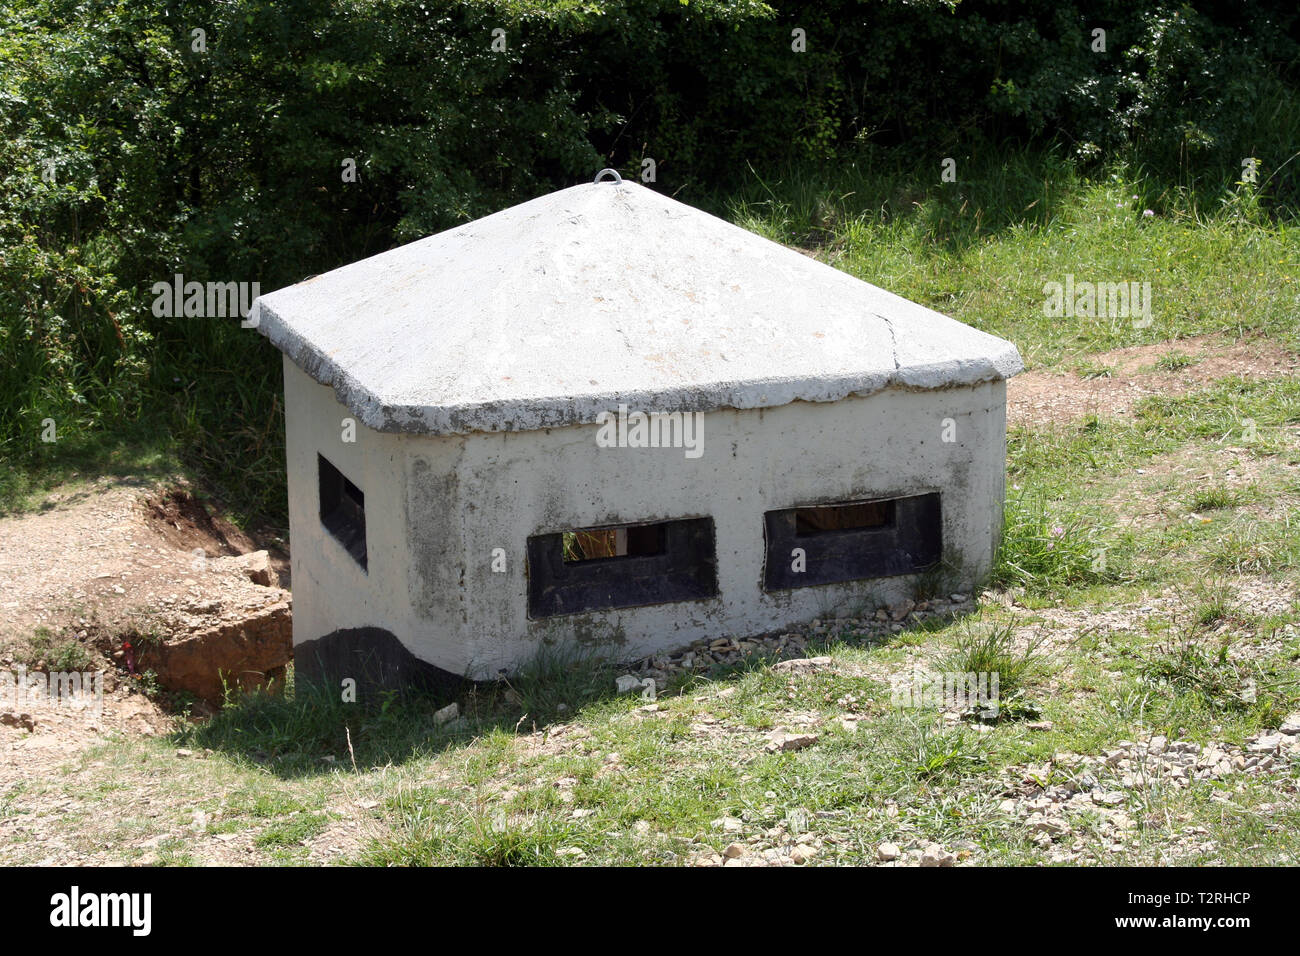 A bunker of the former GDR border police facilities. Stock Photo